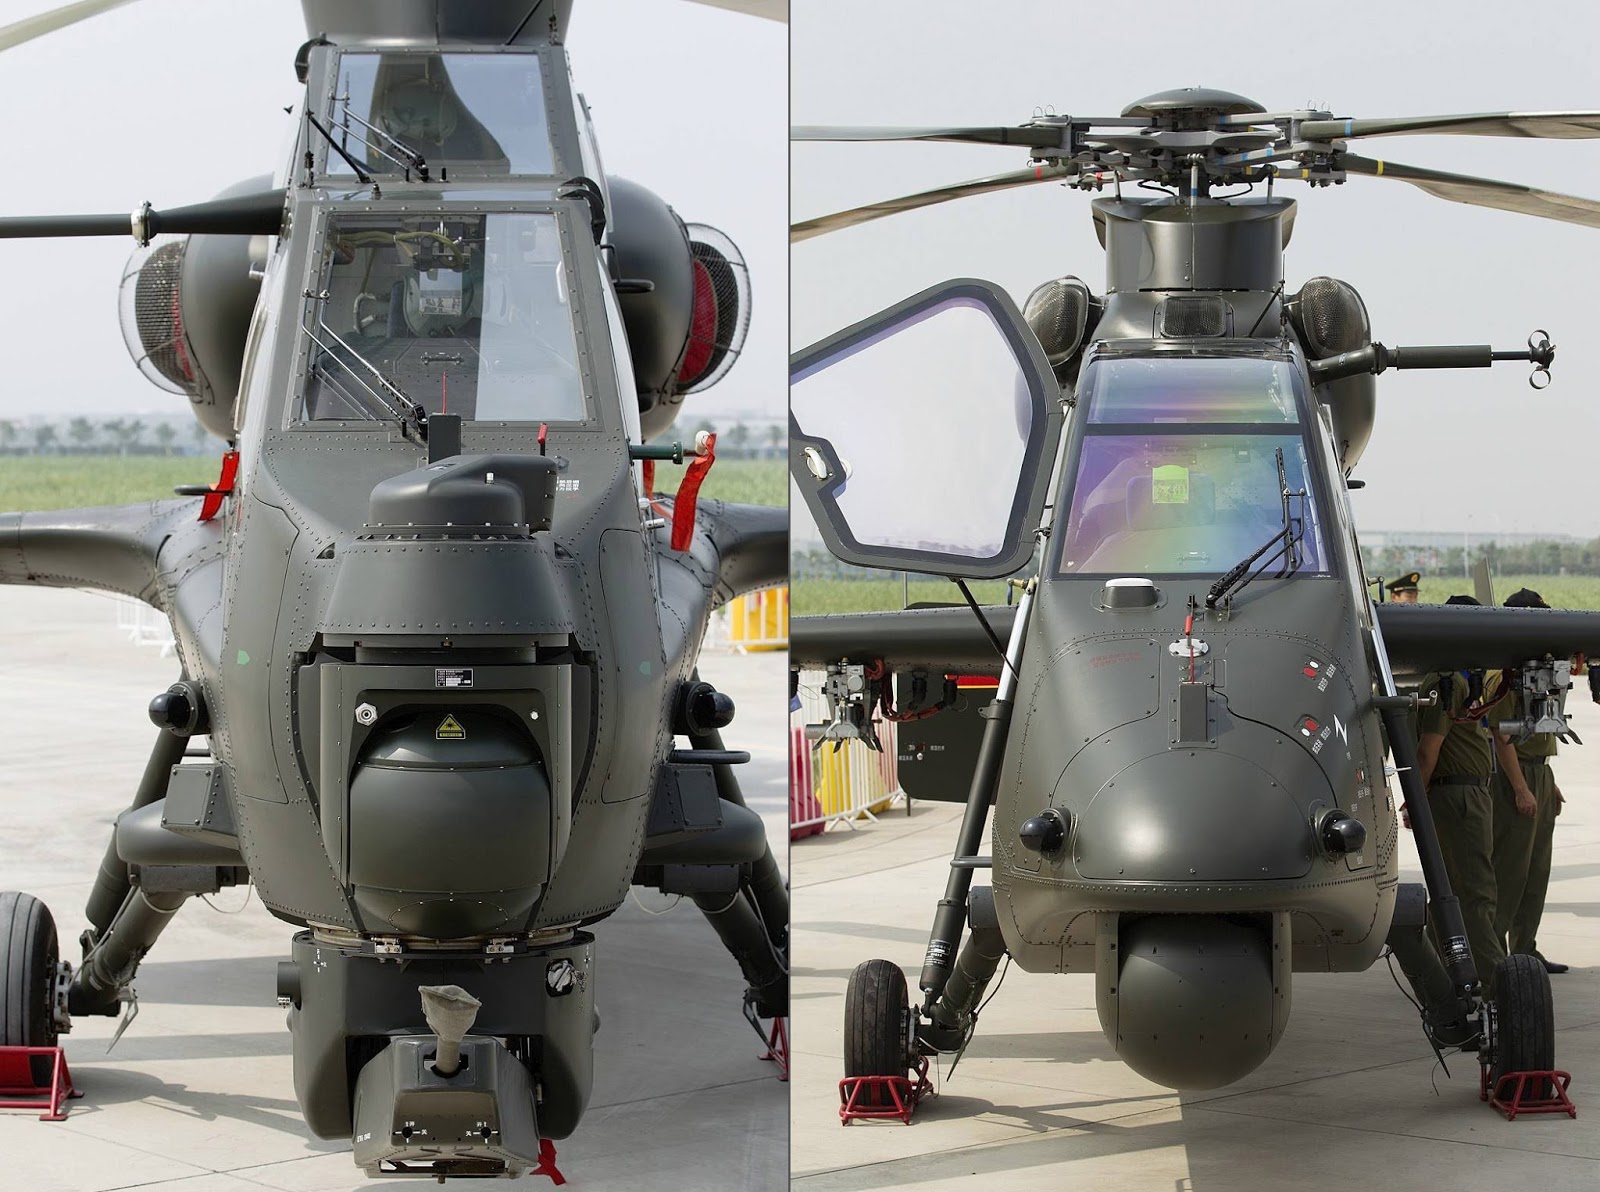 Helicopter News - Página 6 Frontal+view+of+armed+Chinese+wZ-10+wz-19+Attack+Helicopter+gunship+PLA+Peoples+Liberation+Army+Air+Force+abcdefexport+pakitan+missile+hj10+atgm+rocket+wz-10+radaraam++firing+4th+5+6+7+8+9akd-10+navy+(5)